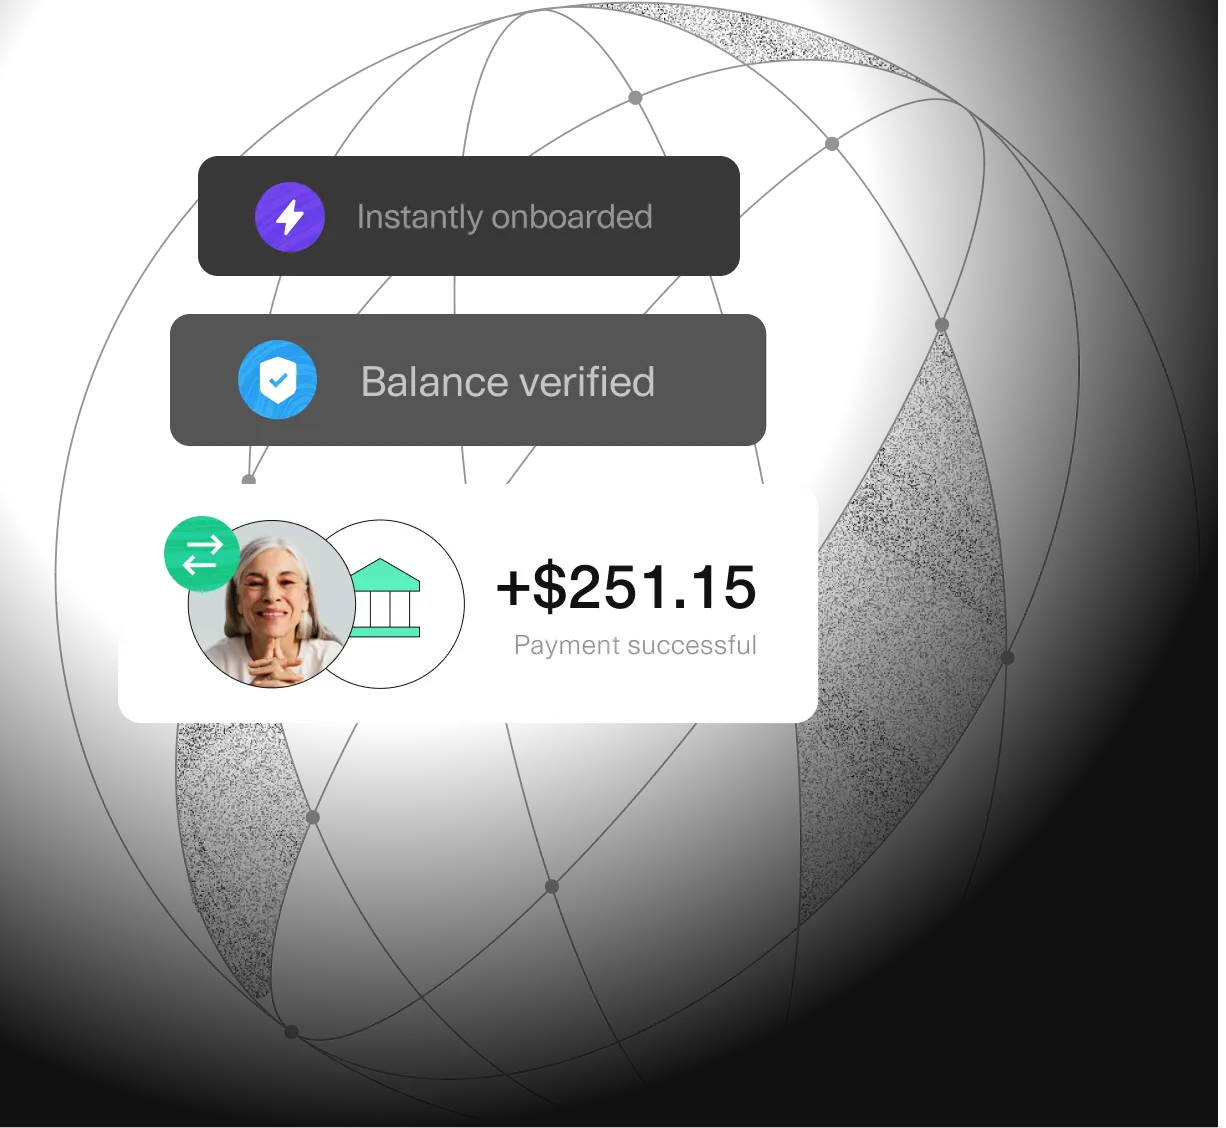 Text reading instantly onboarded, balance verified, +$43.00 payment successful in layering over a globe icon with a black background. 